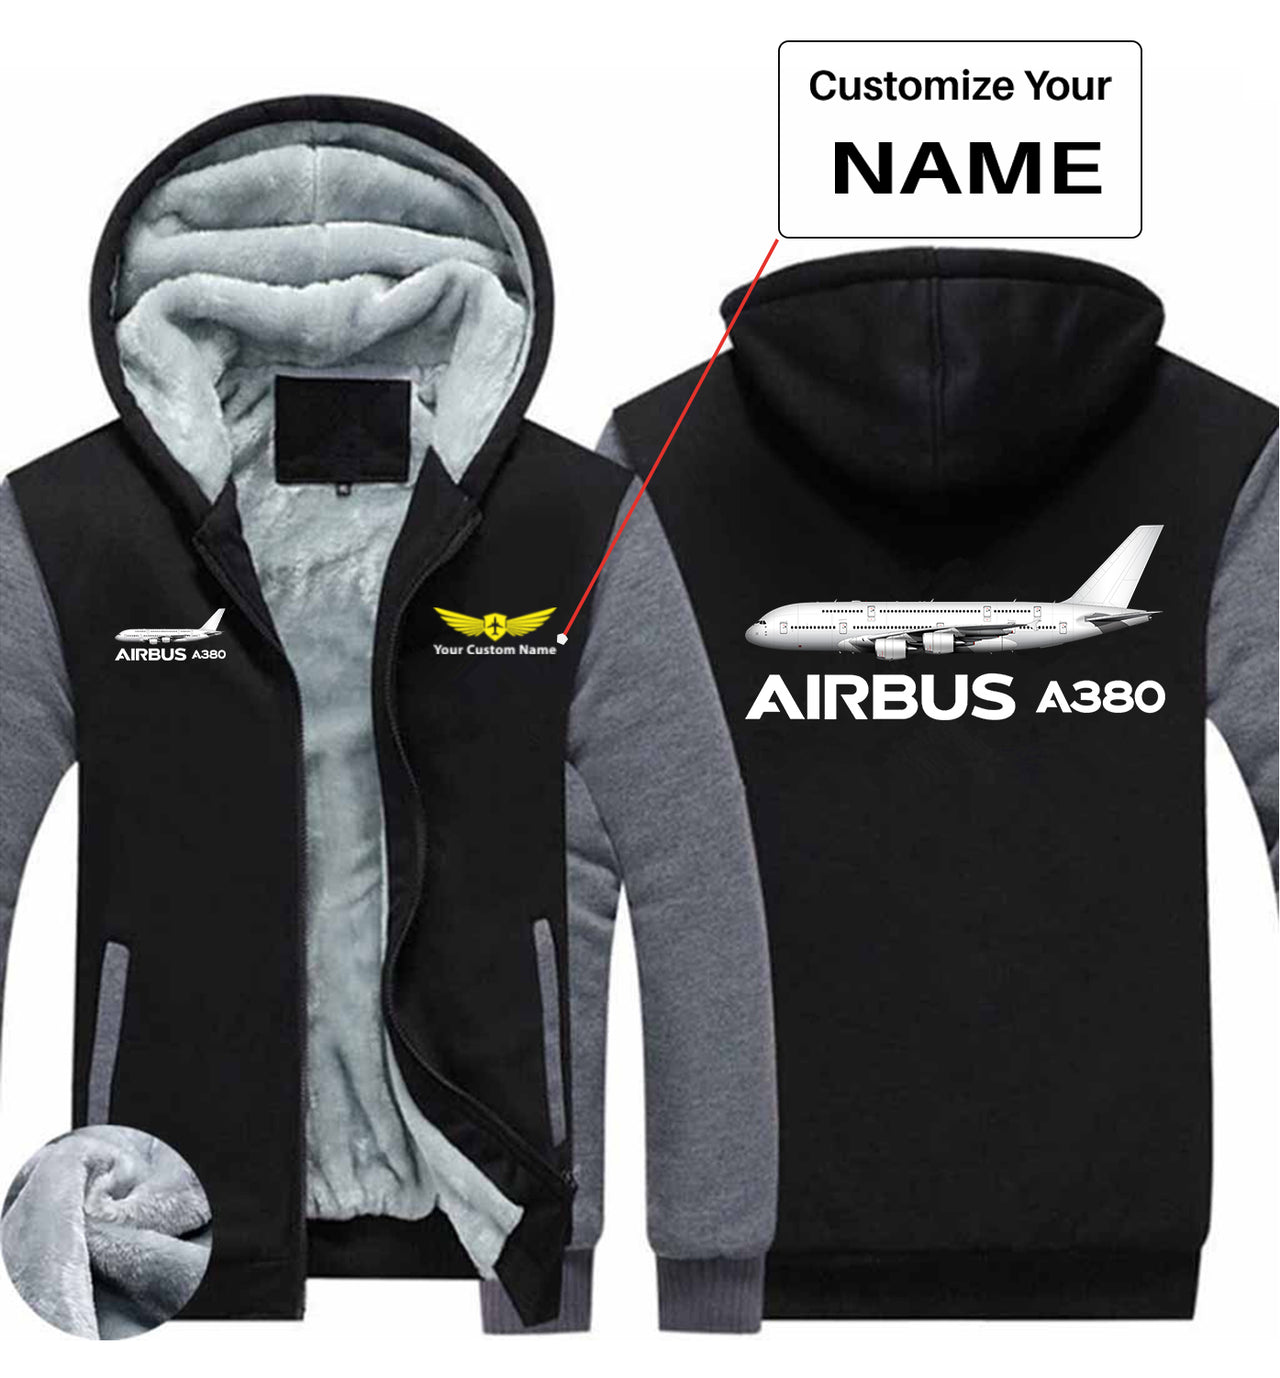 The Airbus A380 Designed Zipped Sweatshirts